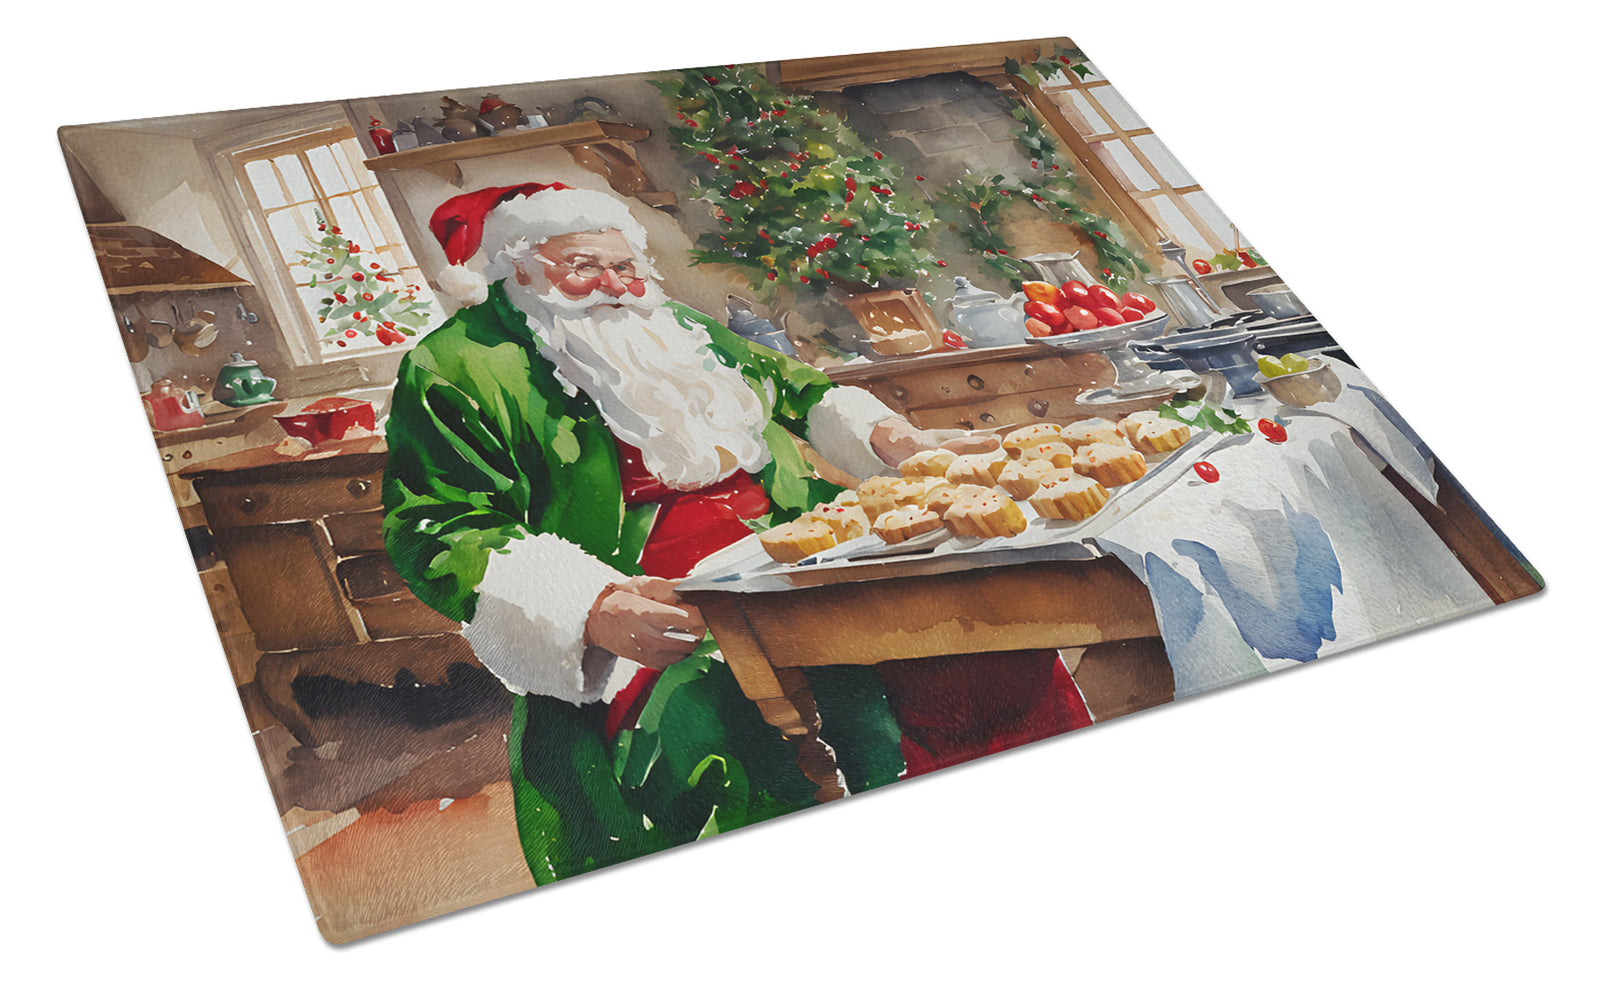 Buy this Cookies with Santa Claus Father Christmas Glass Cutting Board Large